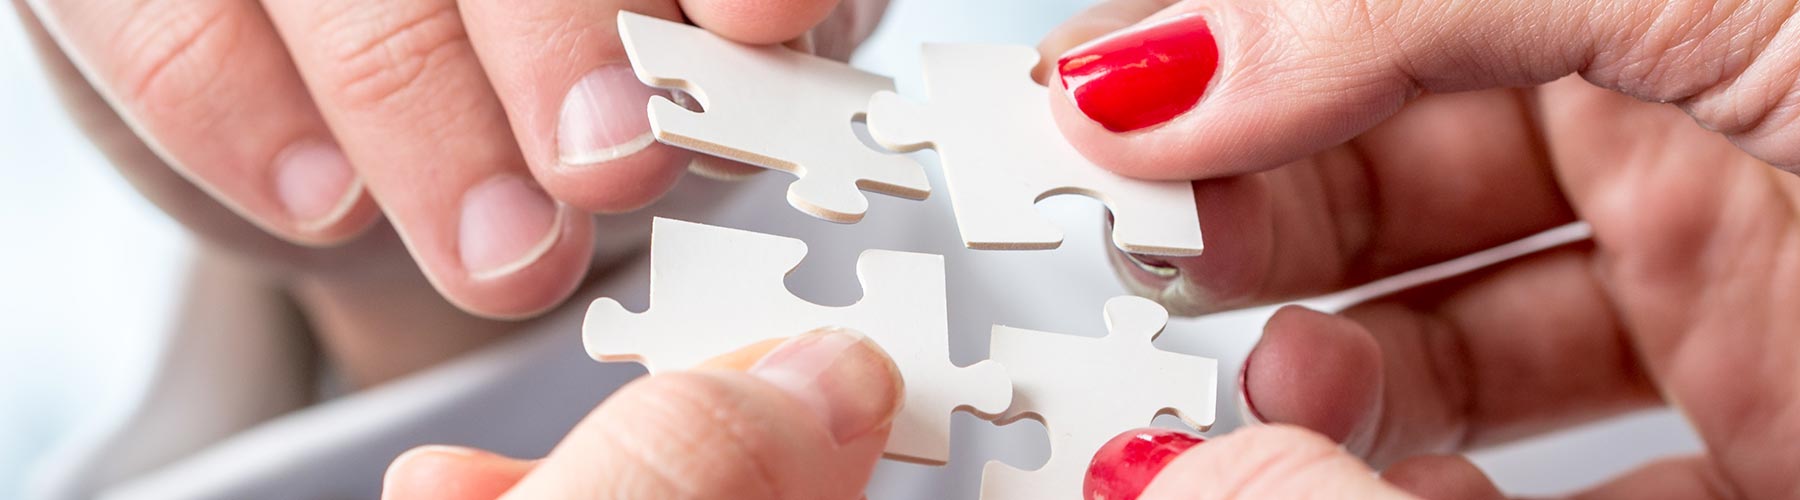 two people fitting four large puzzle pieces together